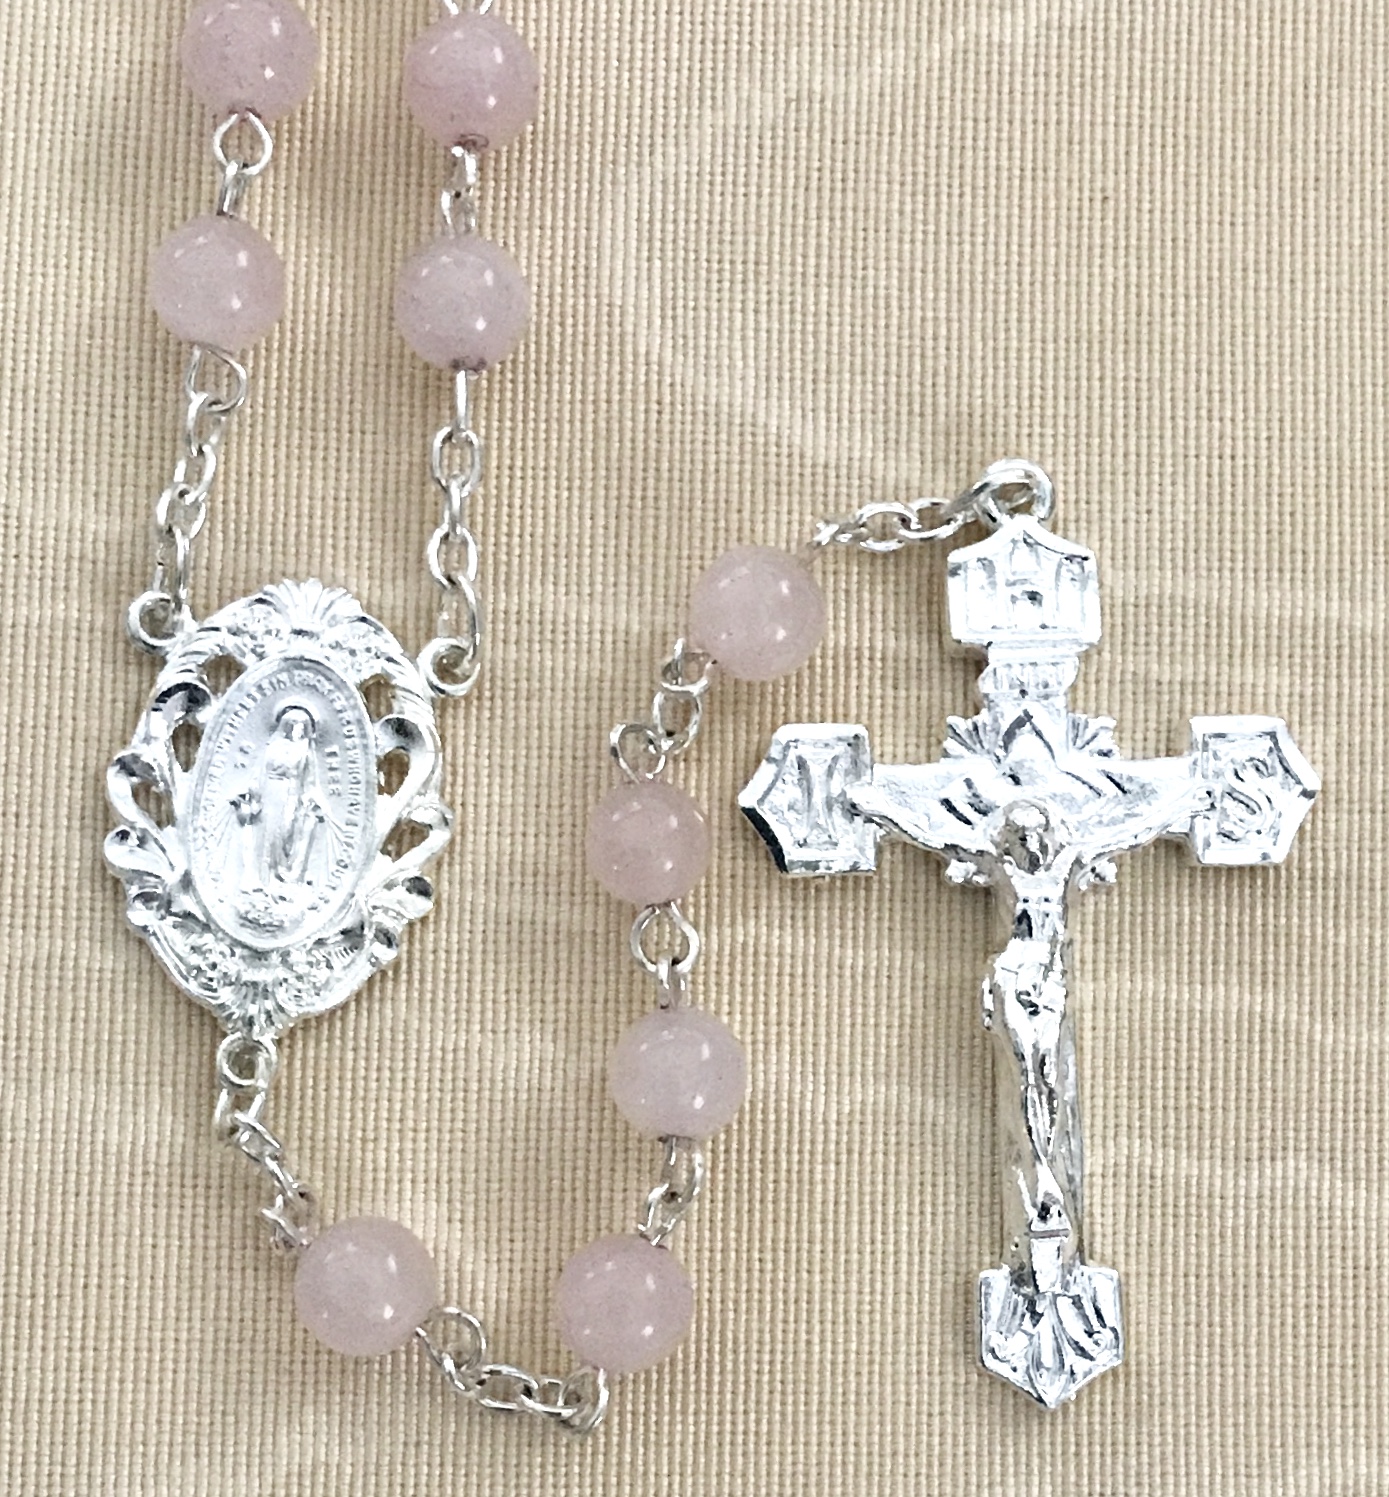 6mm ROSE QUARTZ GEMSTONE ROSARY WITH STRERLING SILVER PLATED CRUCIFIX AND CENTER GIFT BOXED